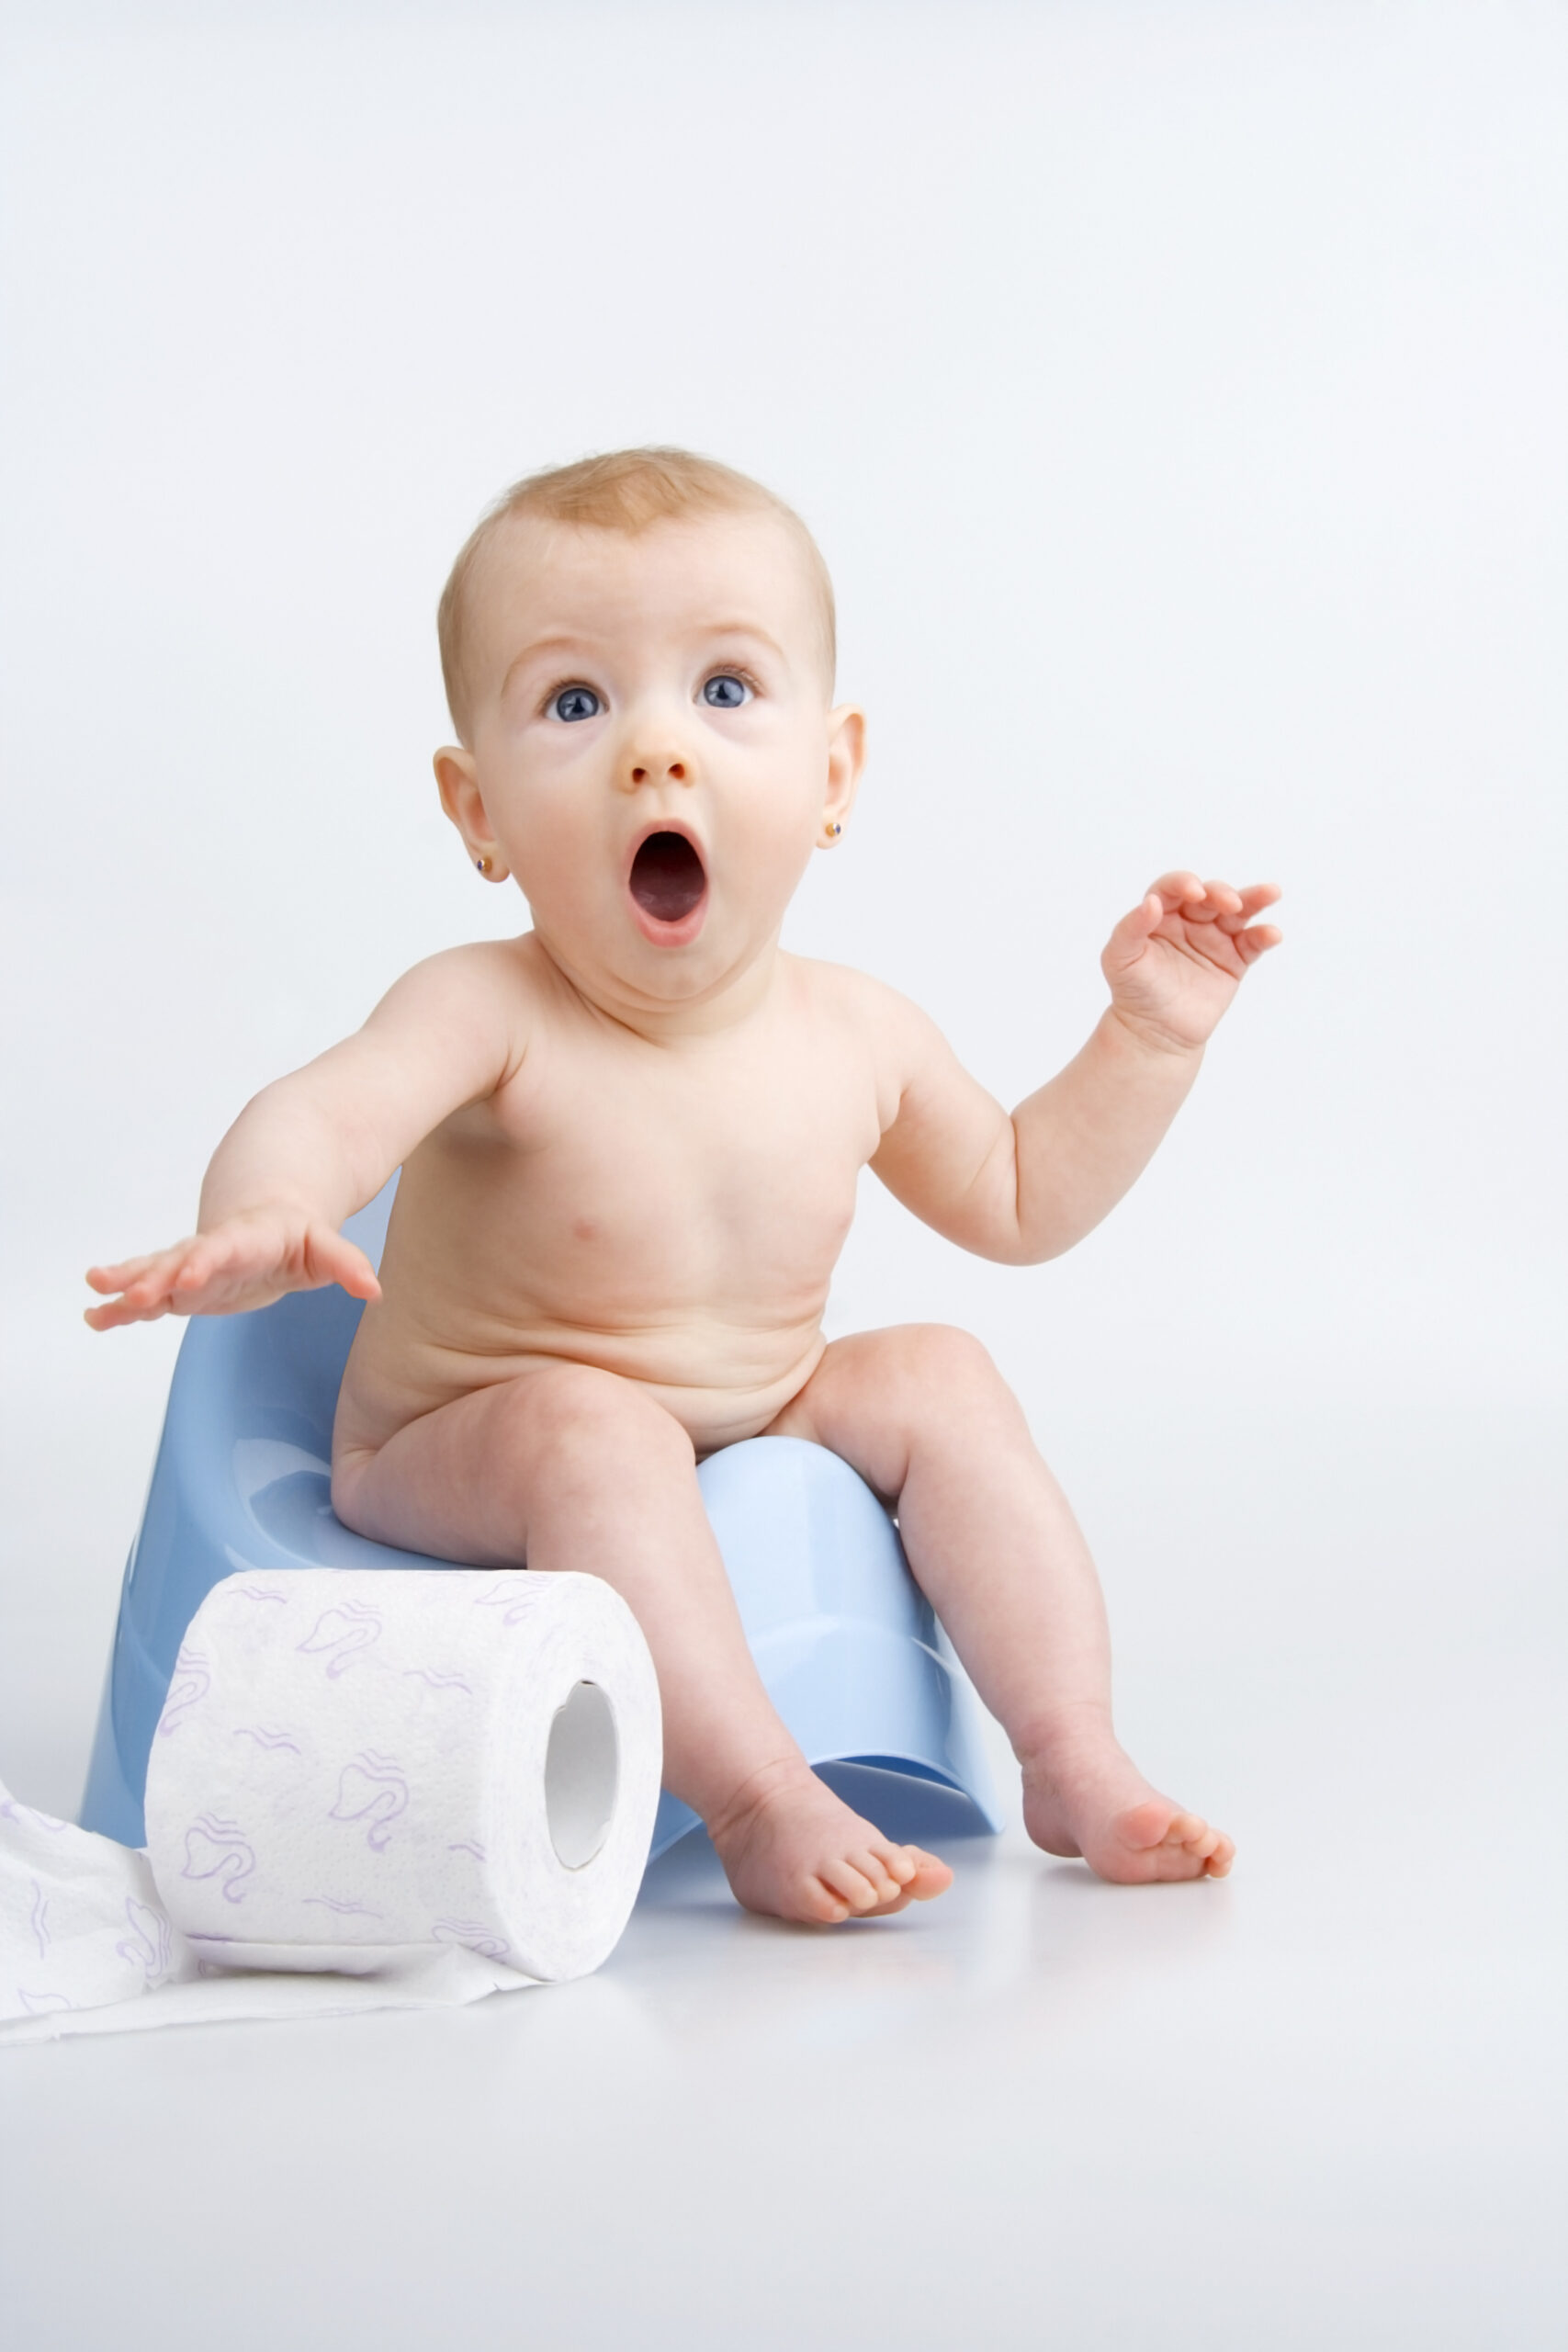 Is your newborn constipated? The real reason your little one can’t poop.